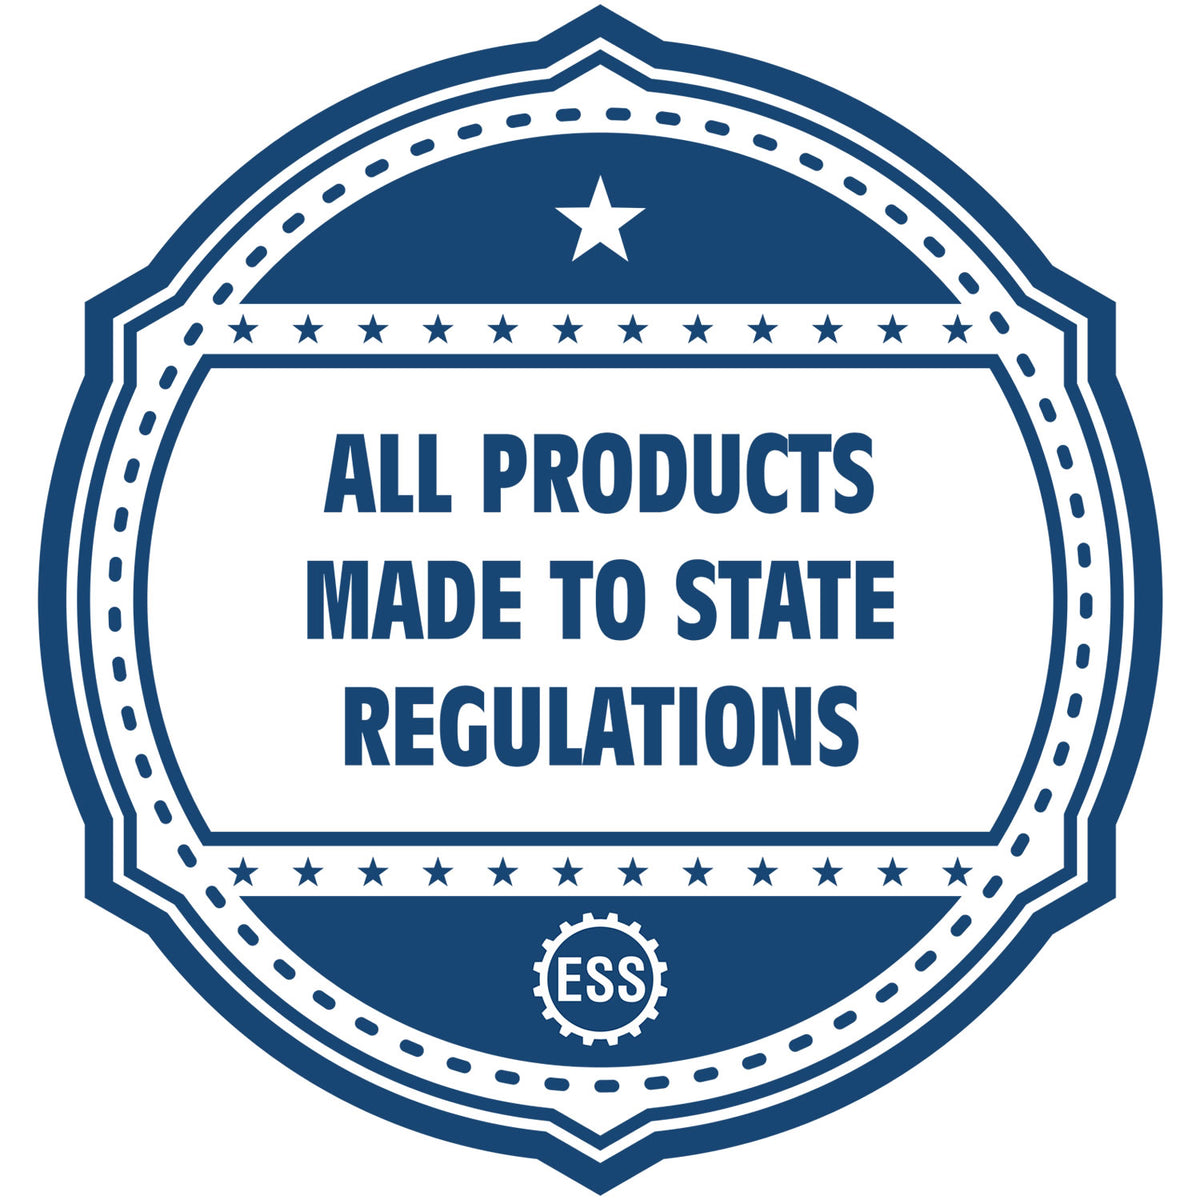 An icon or badge element for the Self-Inking Arkansas Landscape Architect Stamp showing that this product is made in compliance with state regulations.